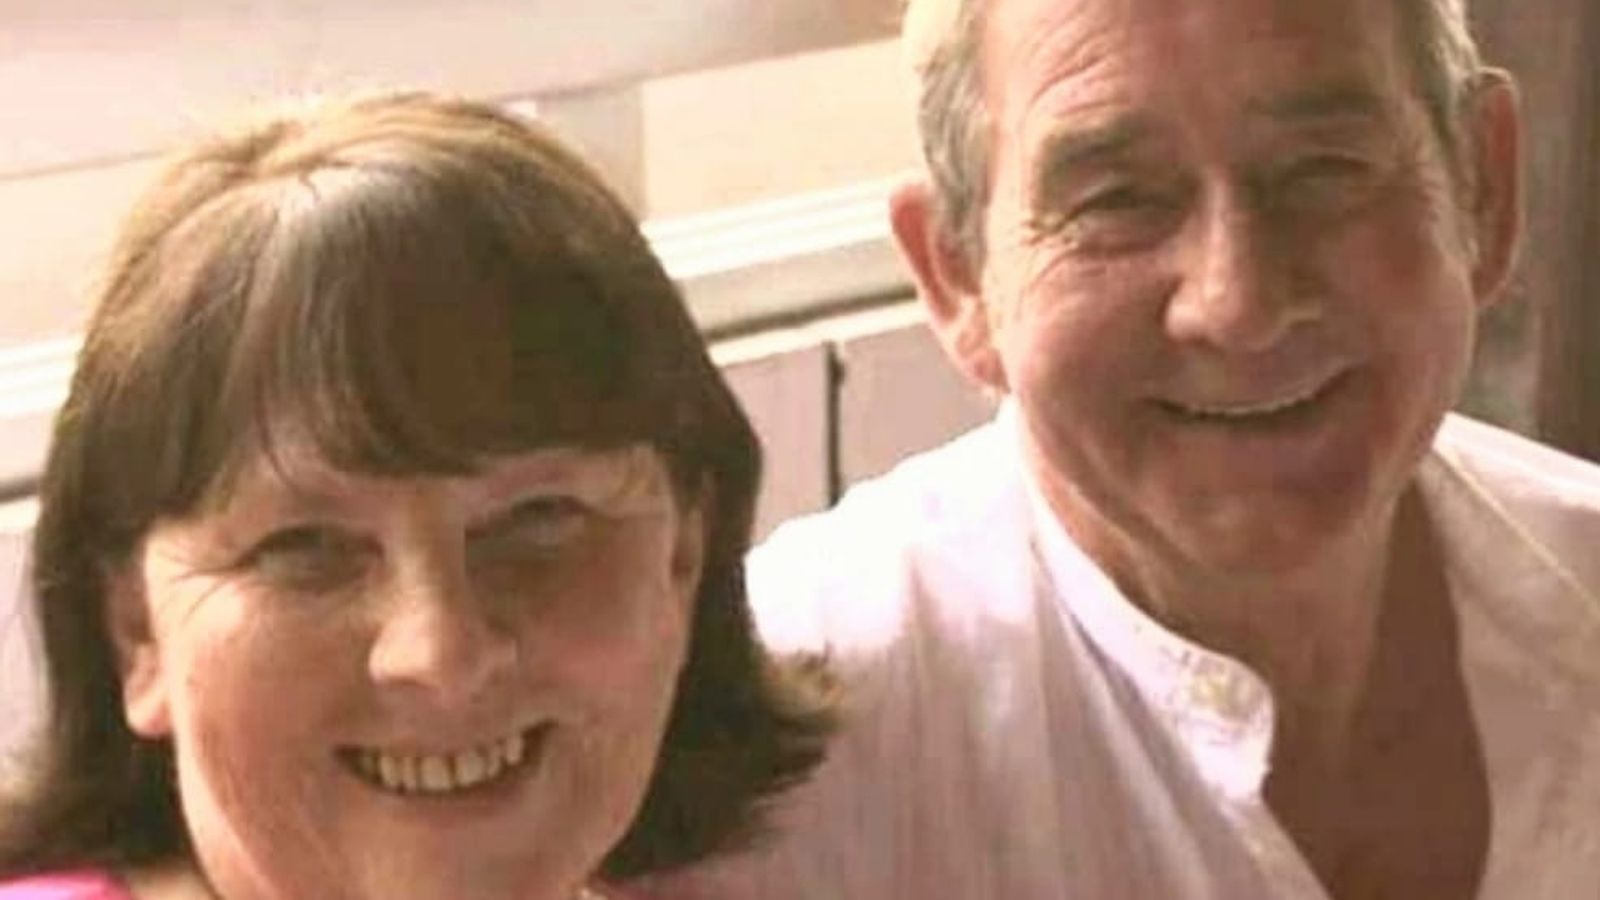 Briton to plead guilty to manslaughter over 'mercy killing' of terminally ill wife in Cyprus